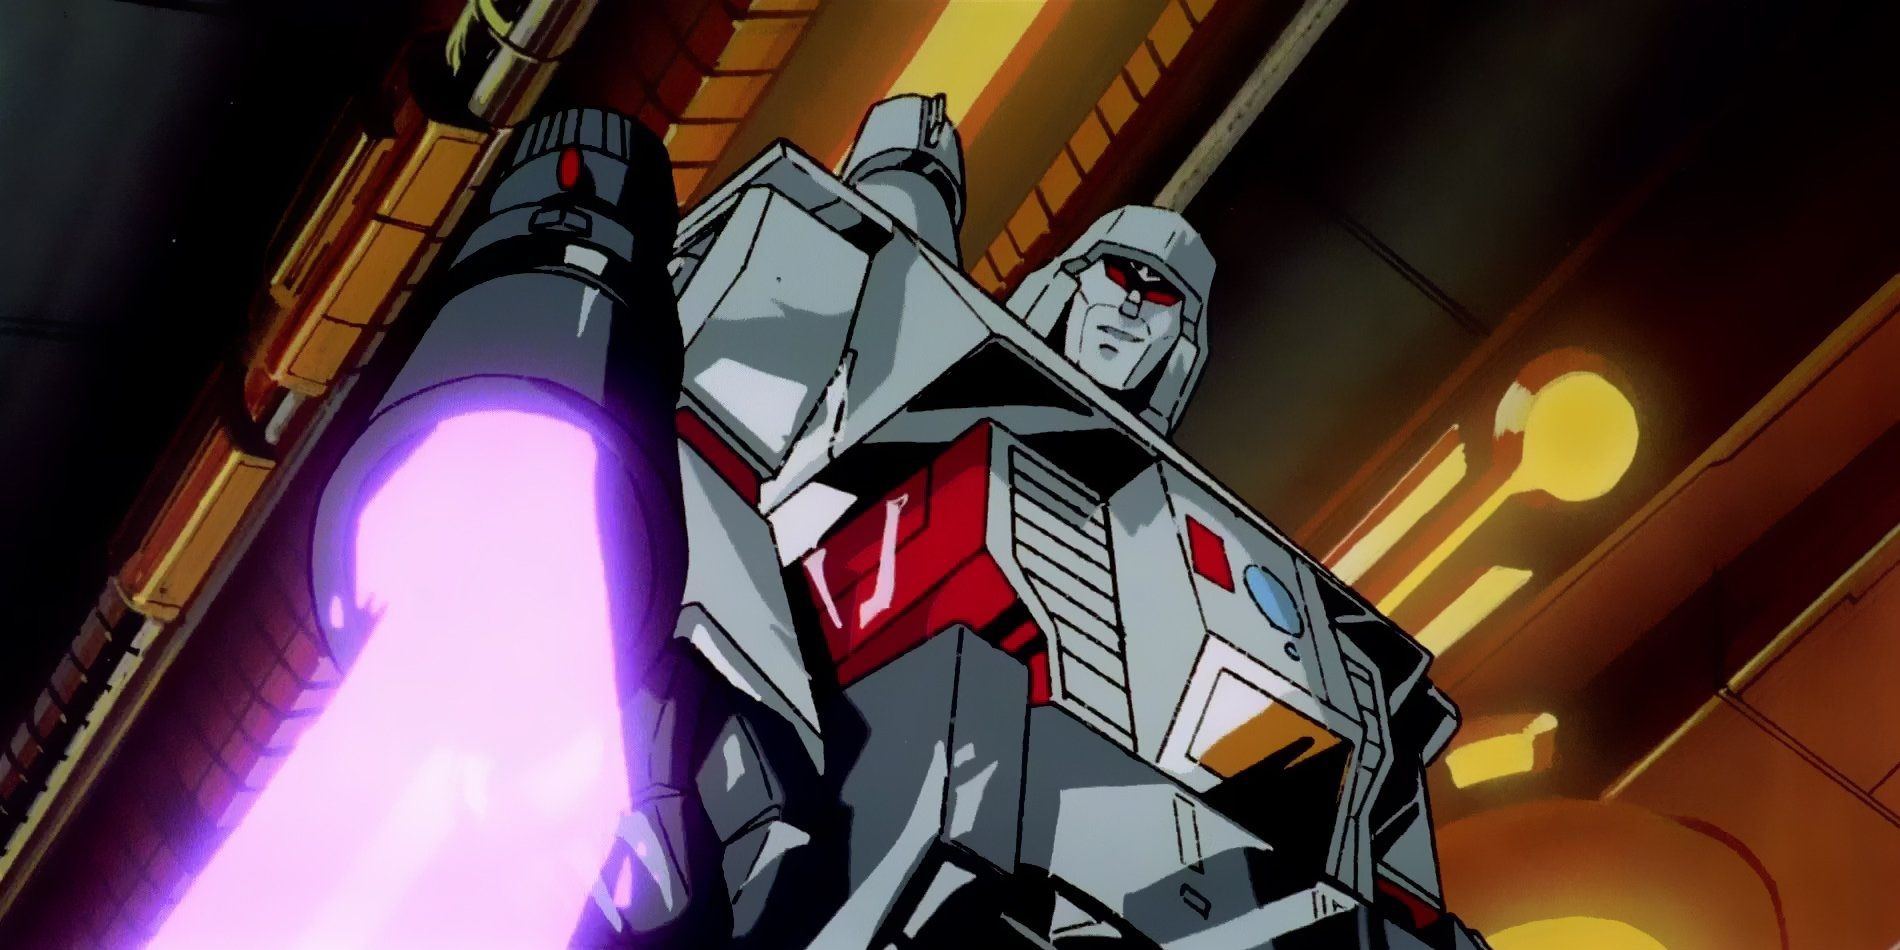 16 Reasons The 1986 Transformers Movie Is Better Than The Current Film Series